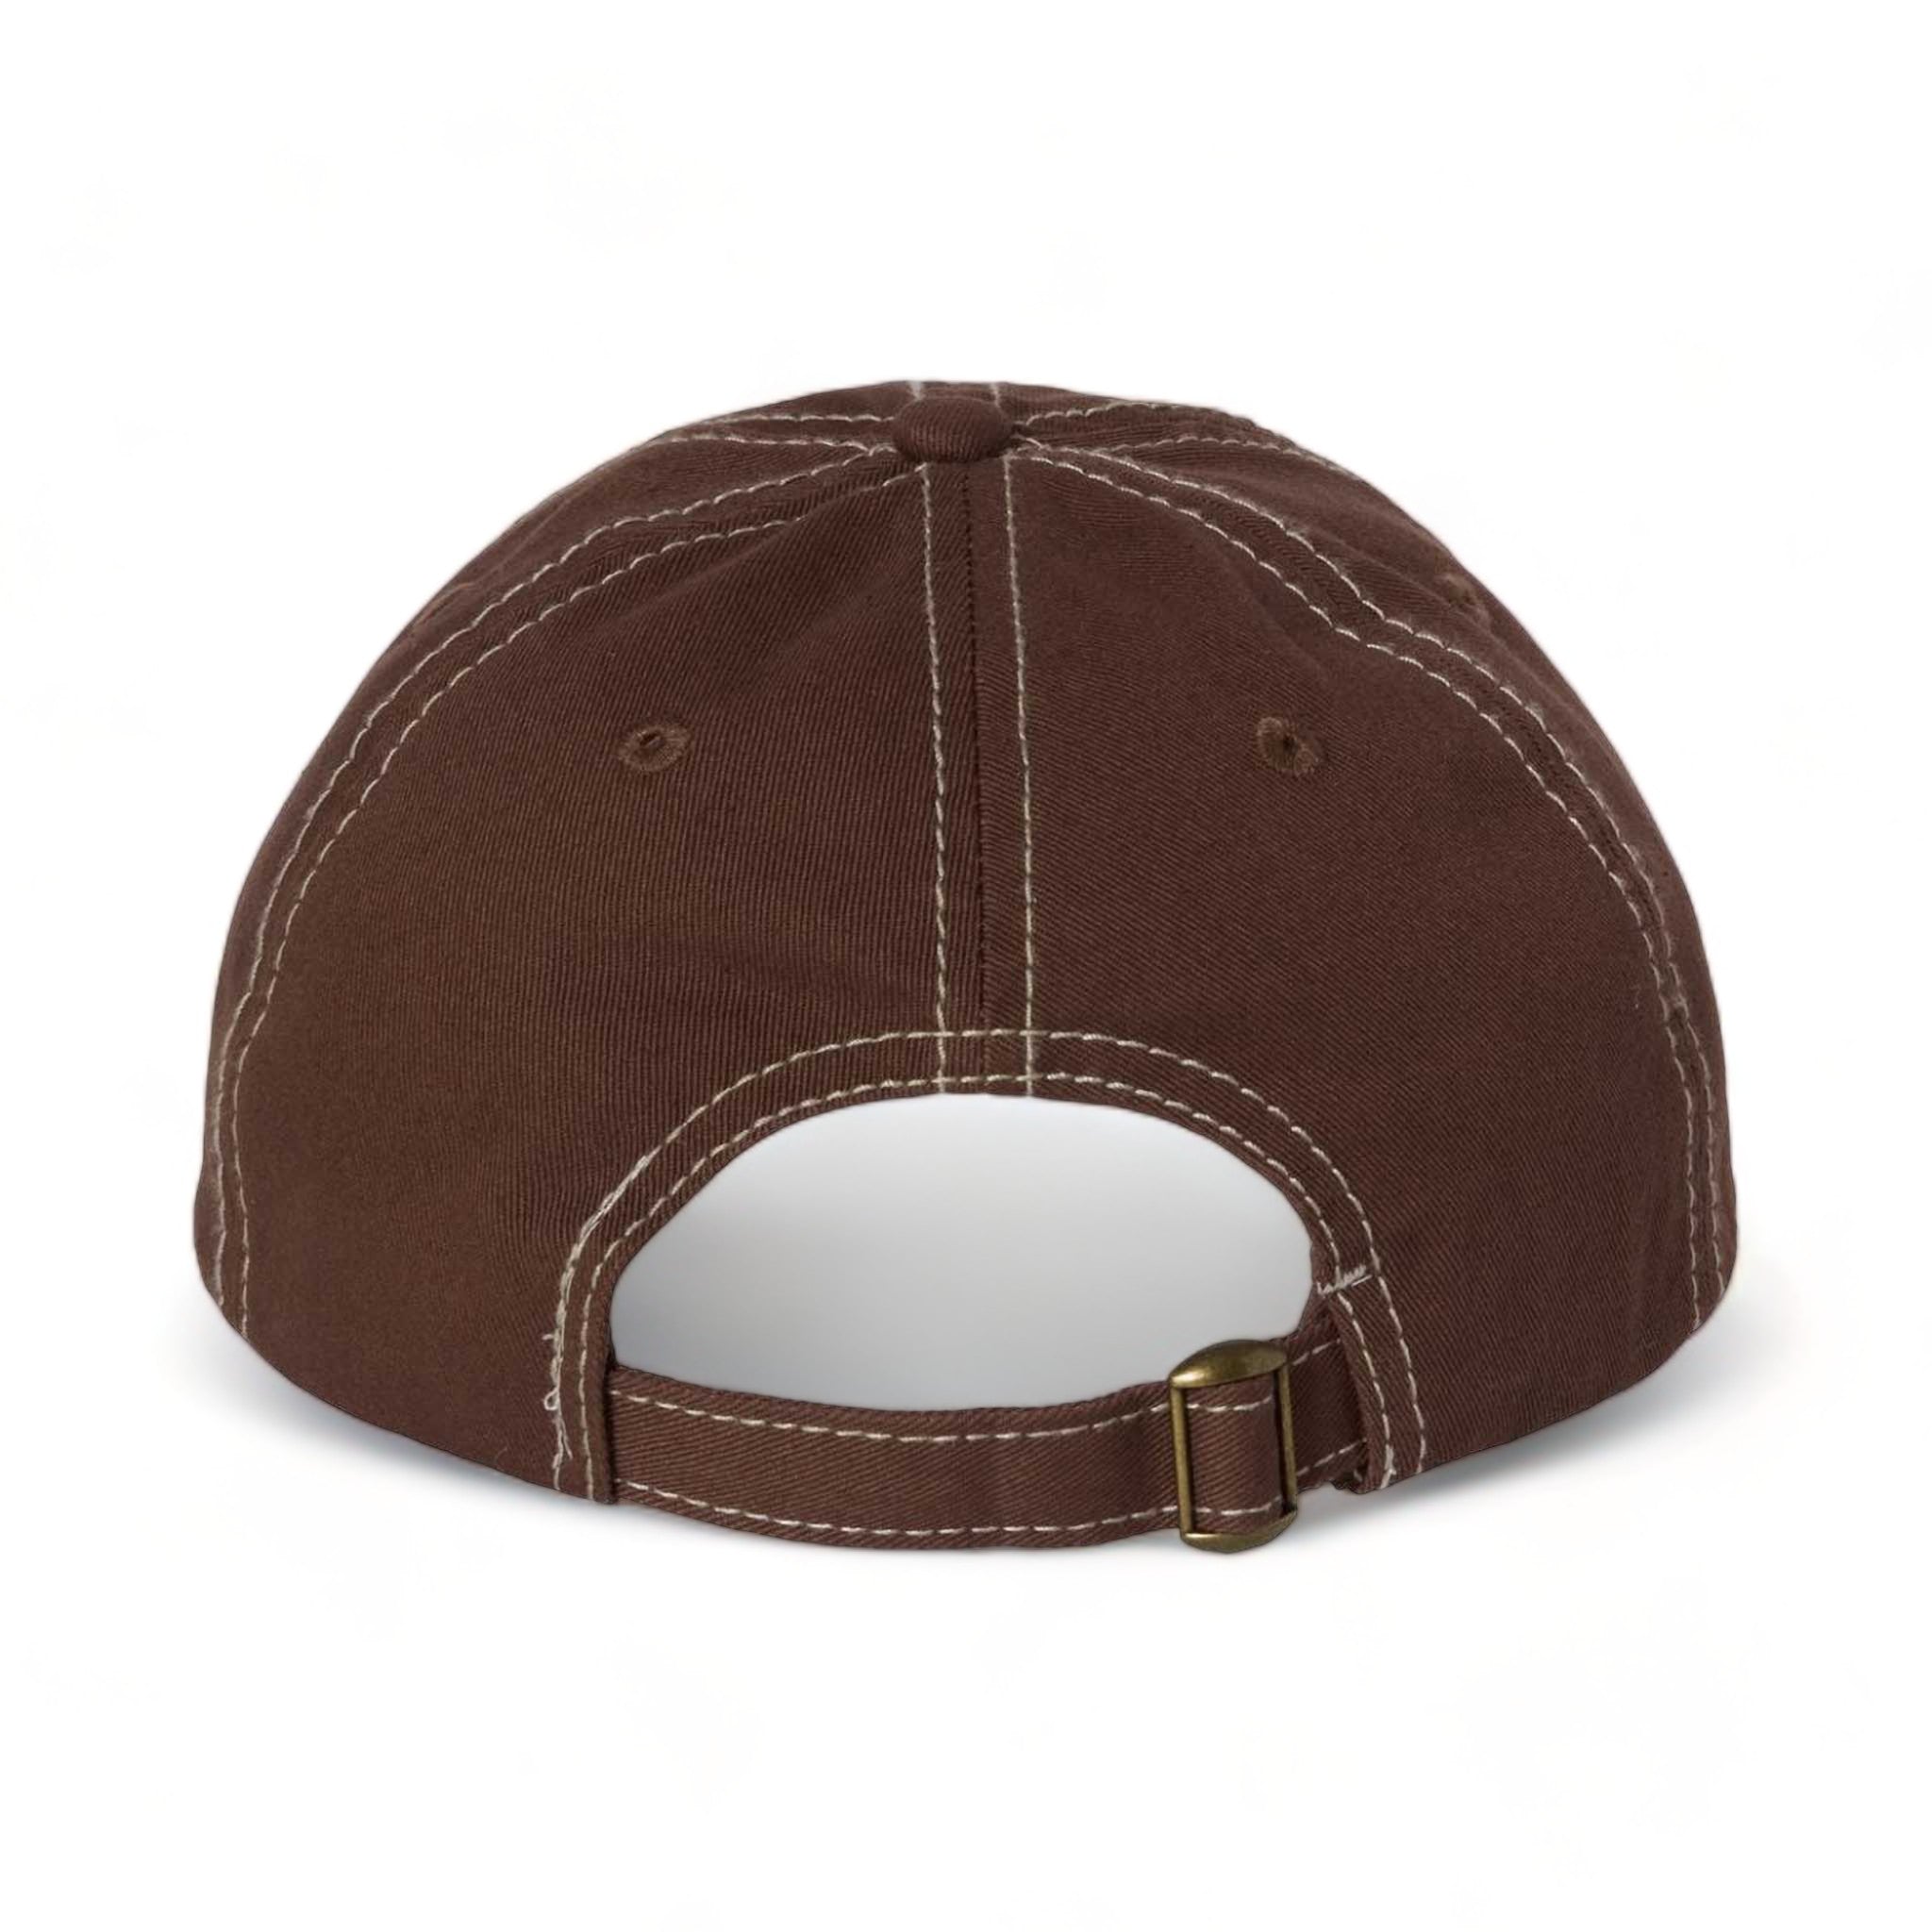 Back view of Valucap VC300A custom hat in brown and stone stitch